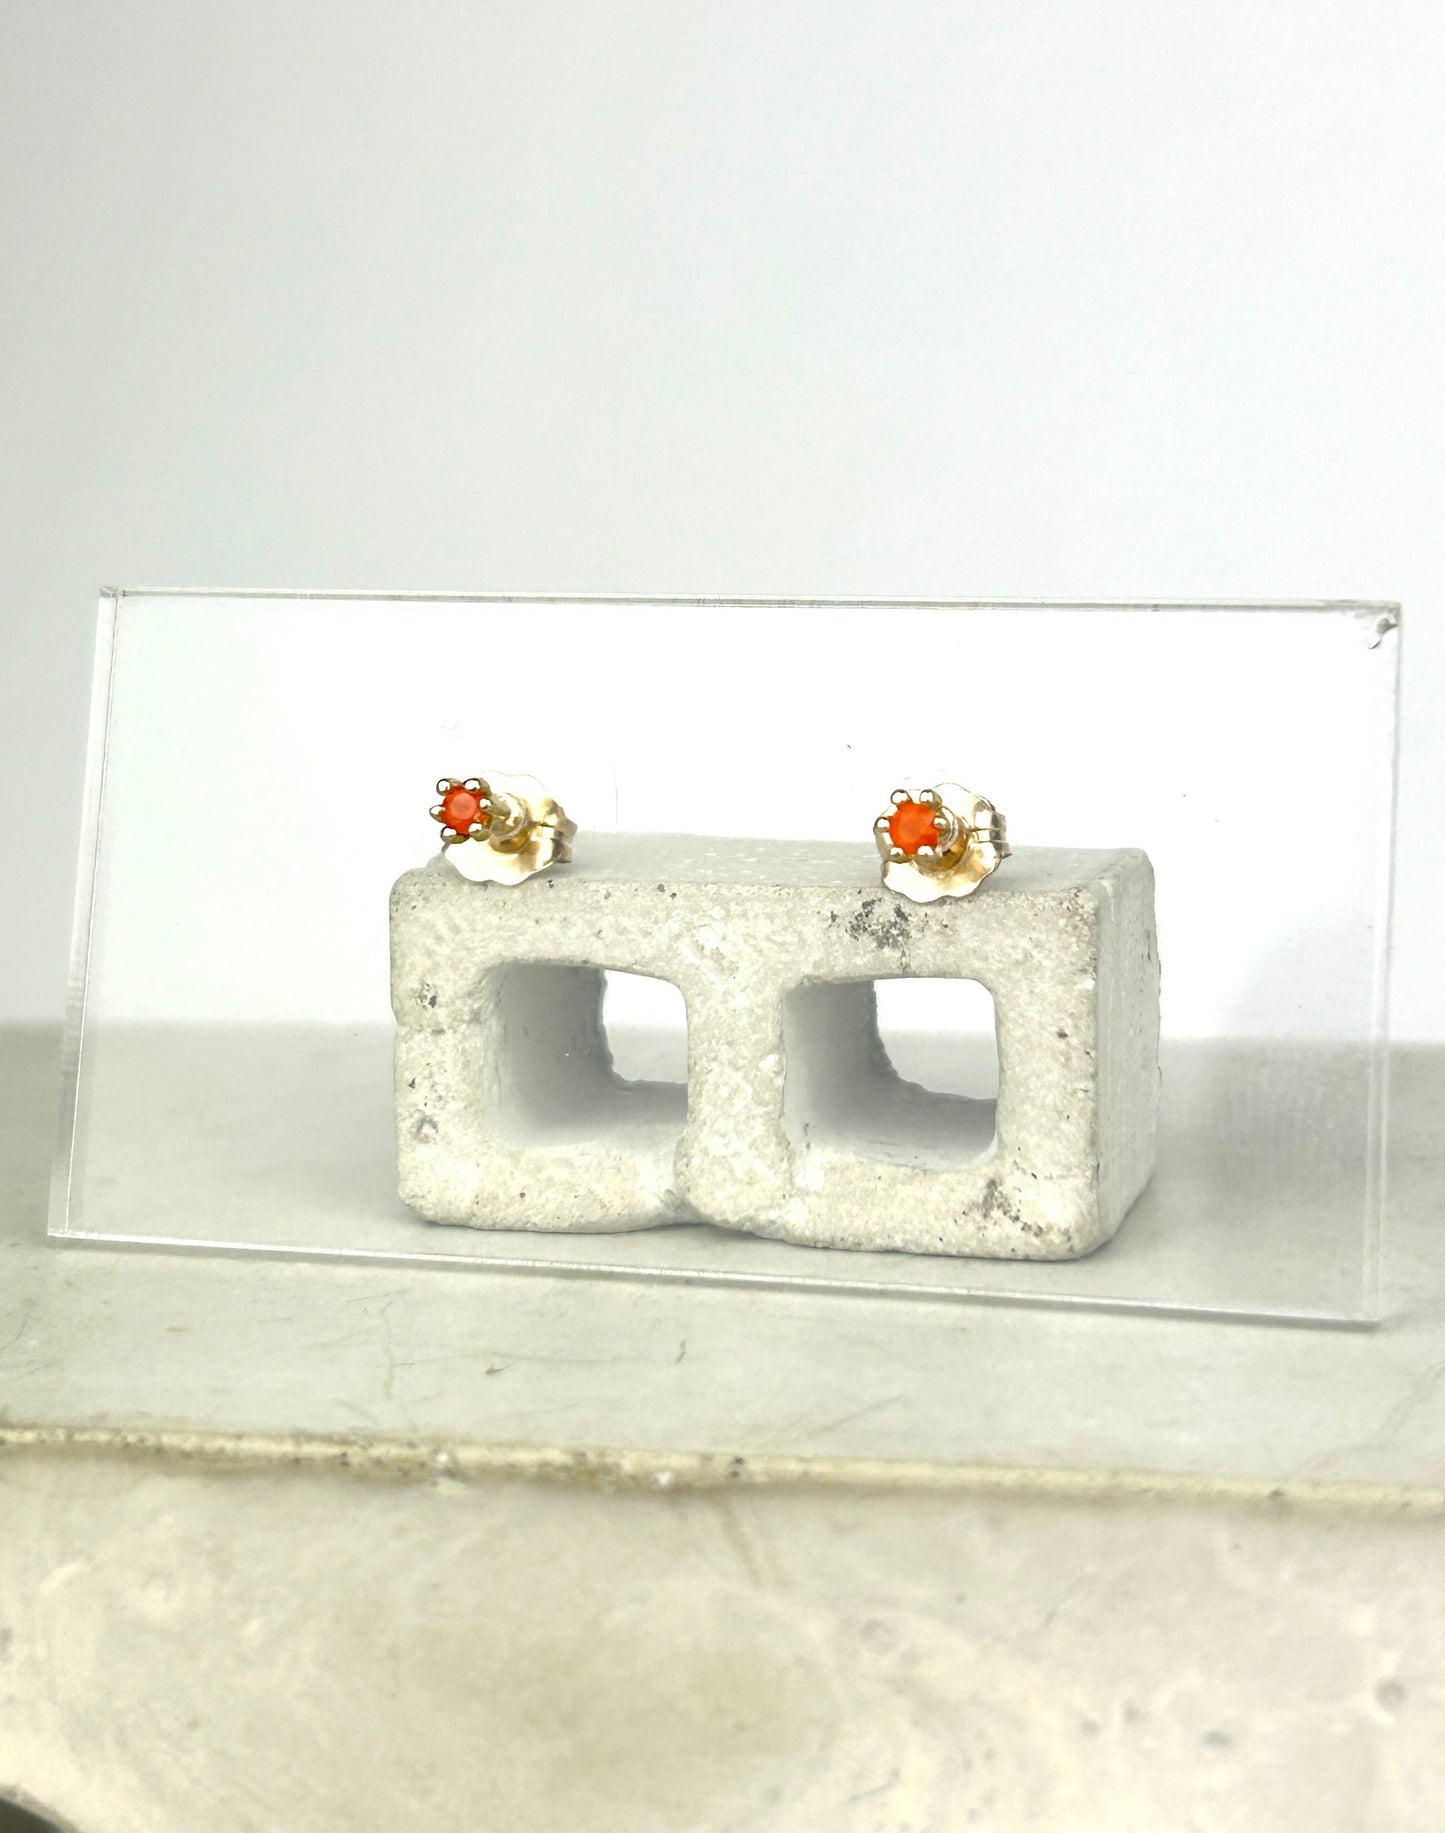 Front view 14k gold earrings with bright orange carnelians that resemble tulips are displayed on a clear acrylic card held up by a miniature cinderblock infront of a white background.